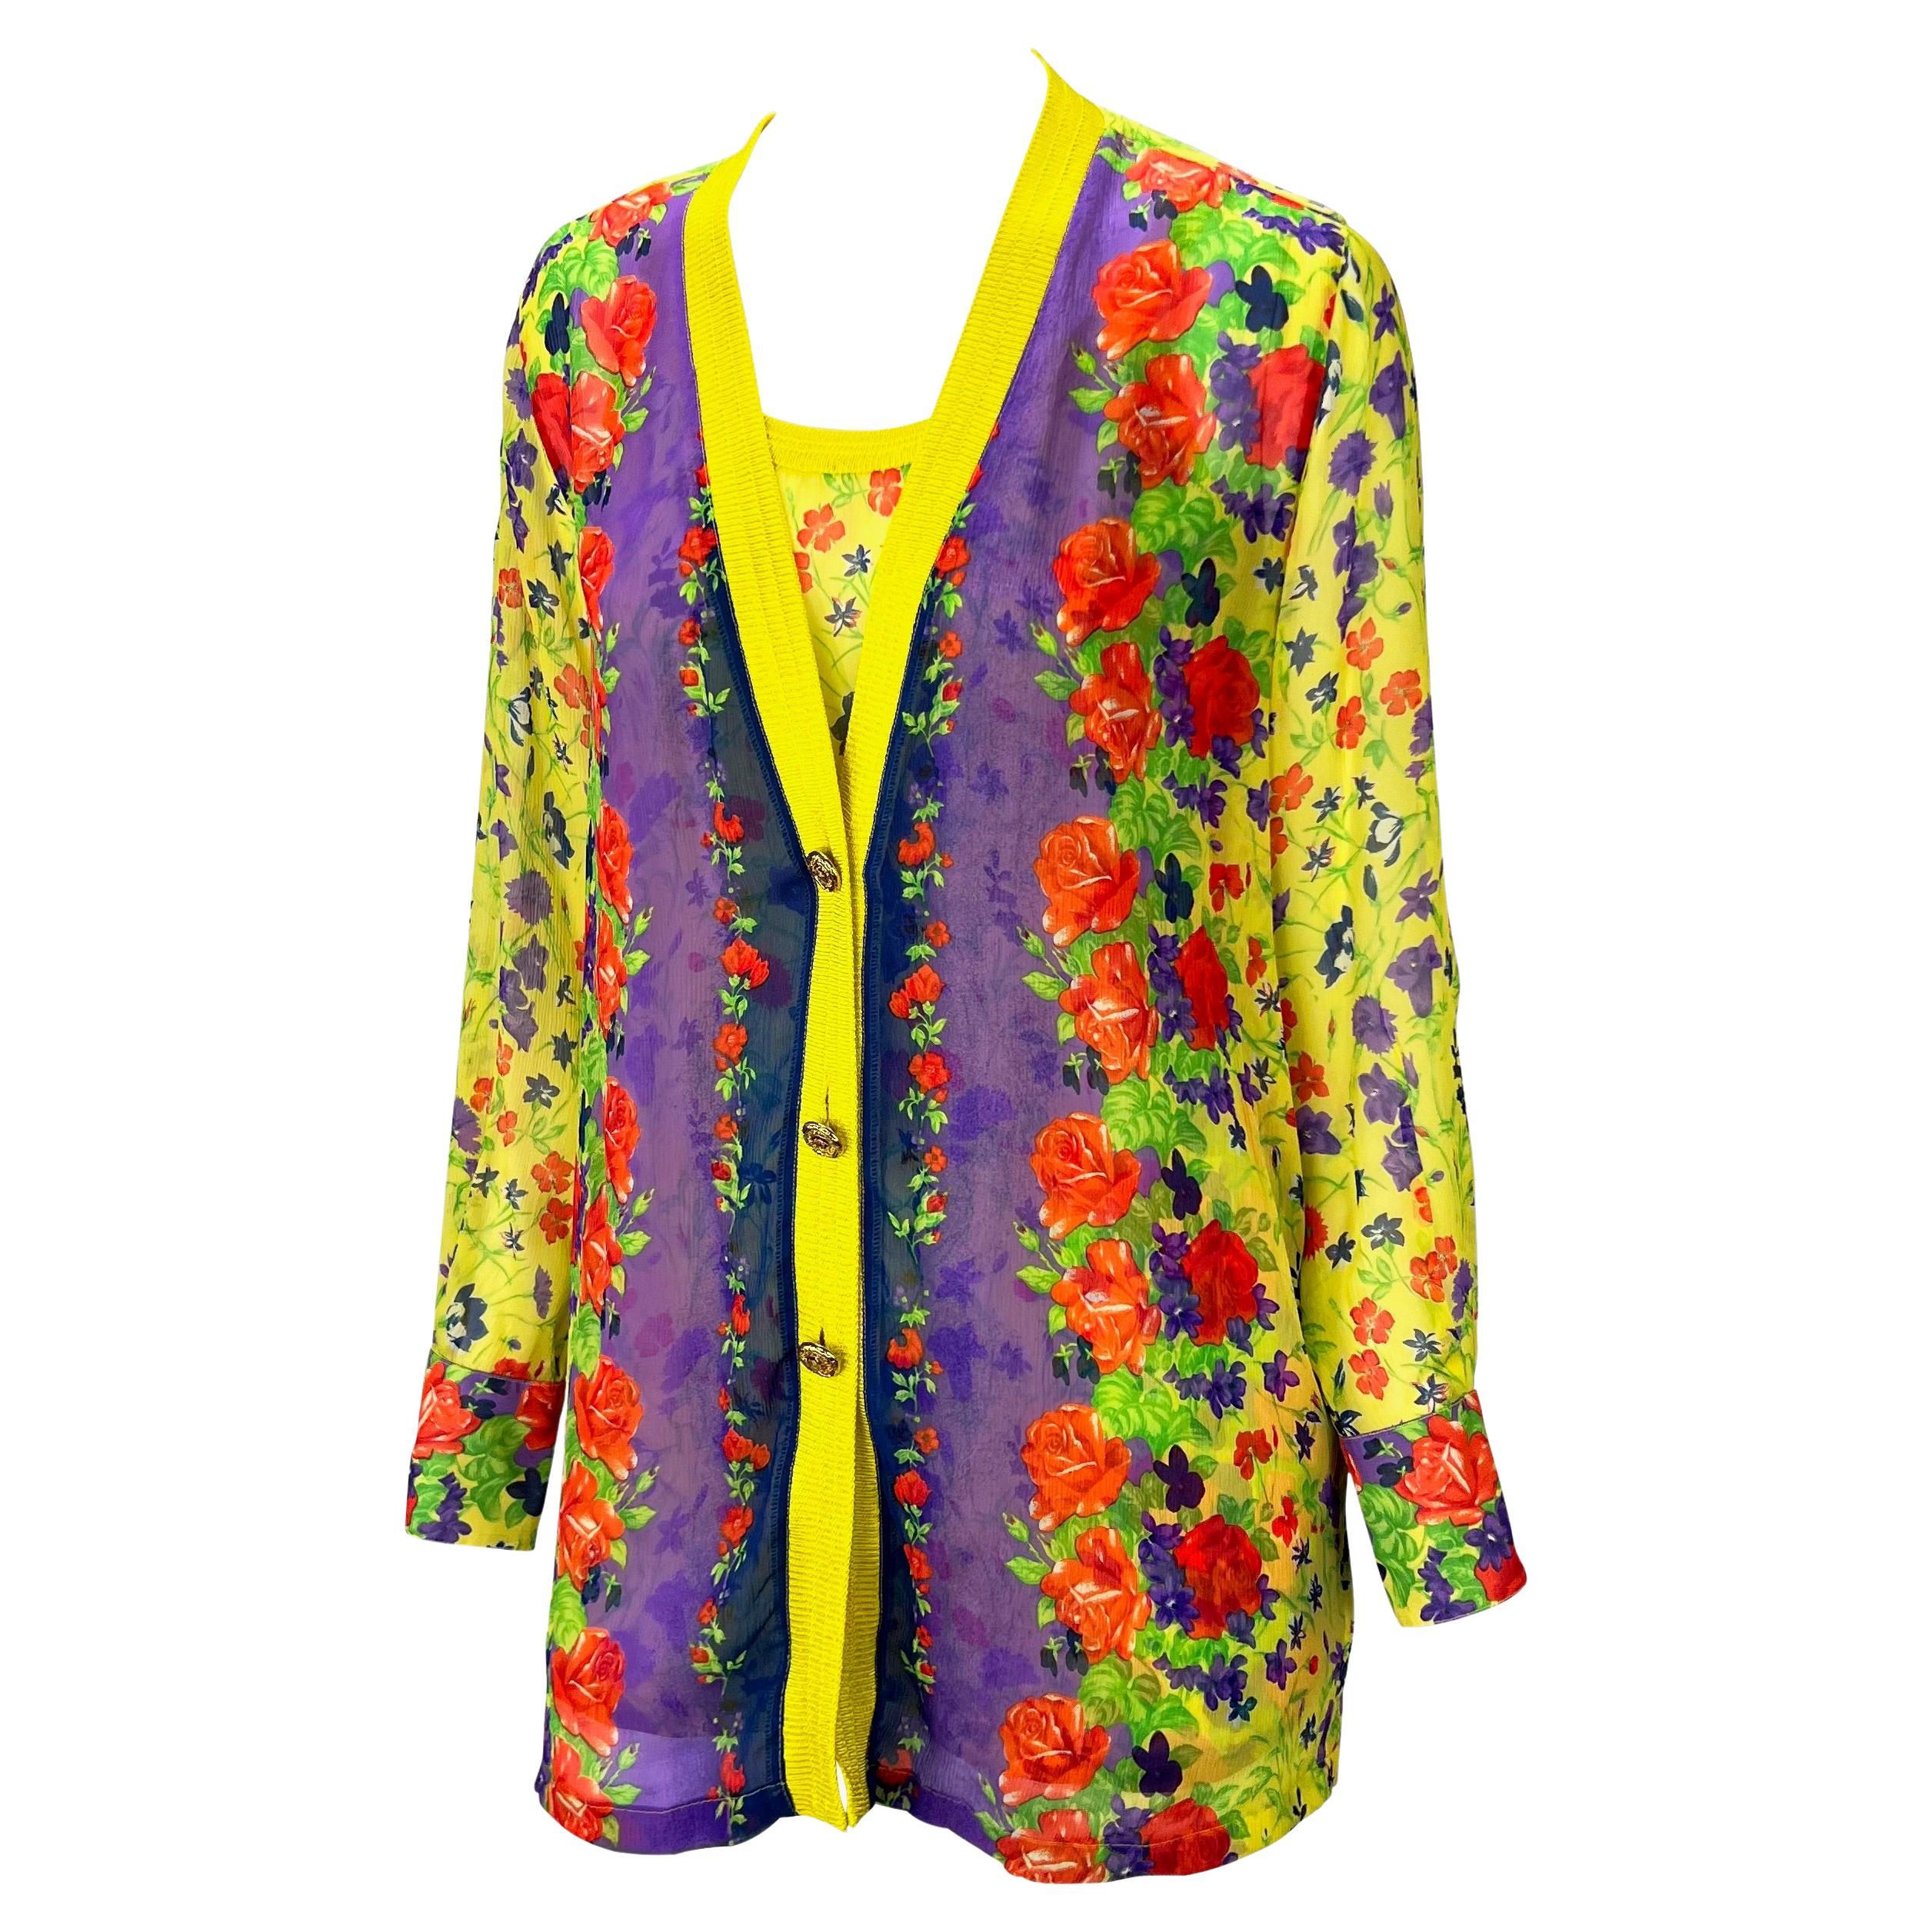 Presenting a sheer floral Gianni Versace cardigan set, designed by Gianni Versace. From the early 1990s, this set is made up of a matching tank top and cardigan both with the same pattern on semi-sheer fabric. The neckline of both the tank top and